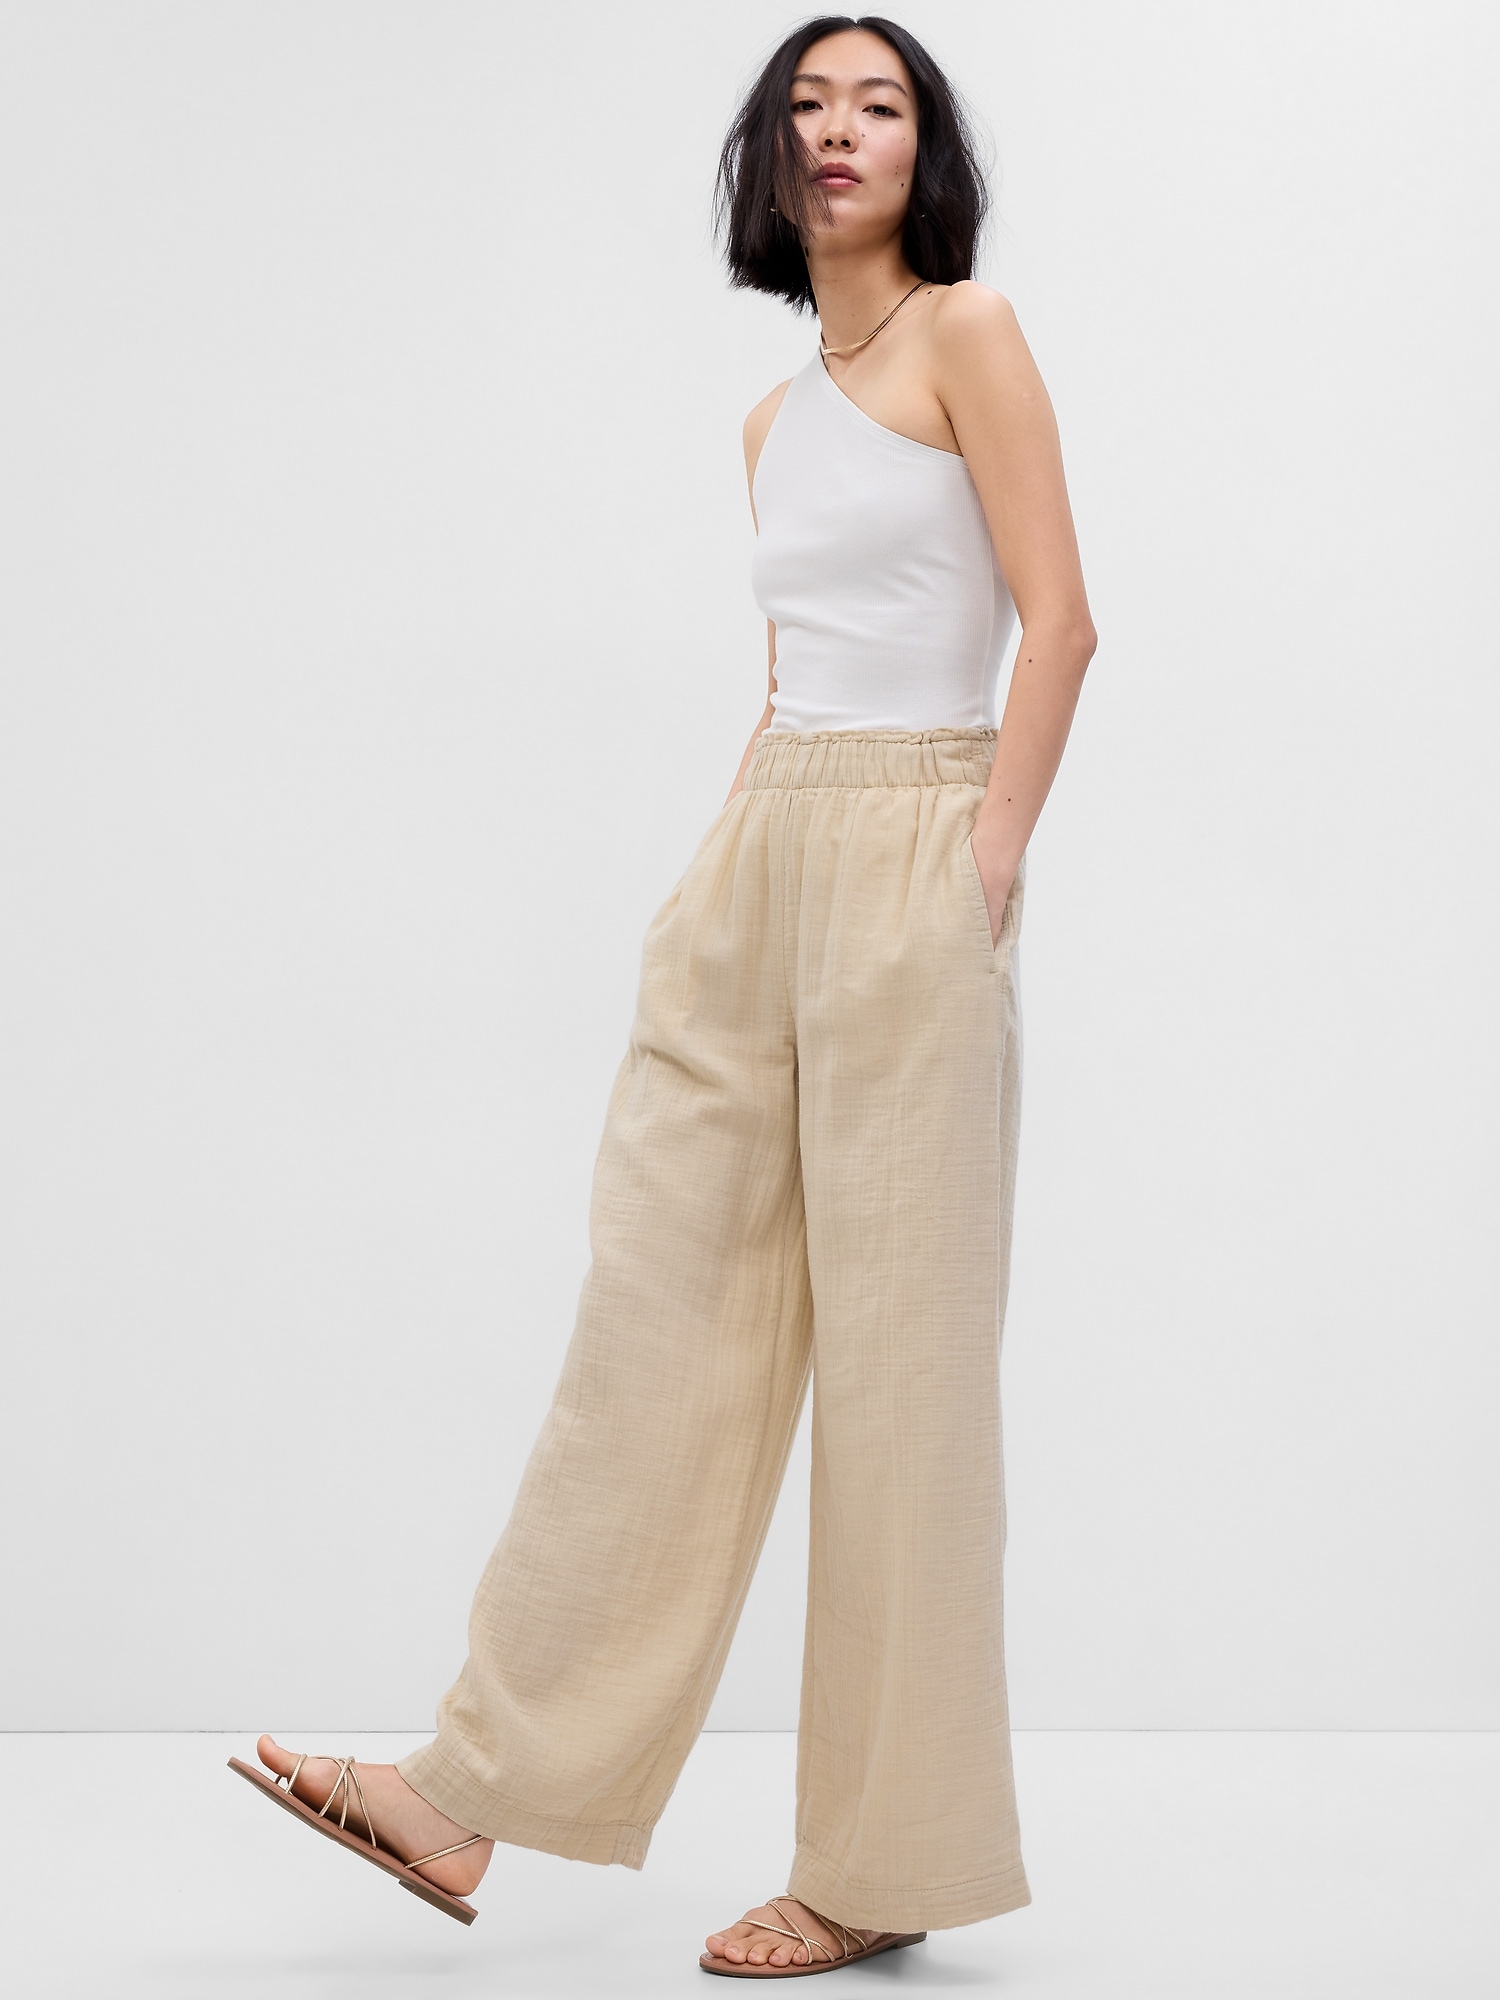 Women's Crinkle Textured Pull-On Palazzo Pant, Women's New Arrivals